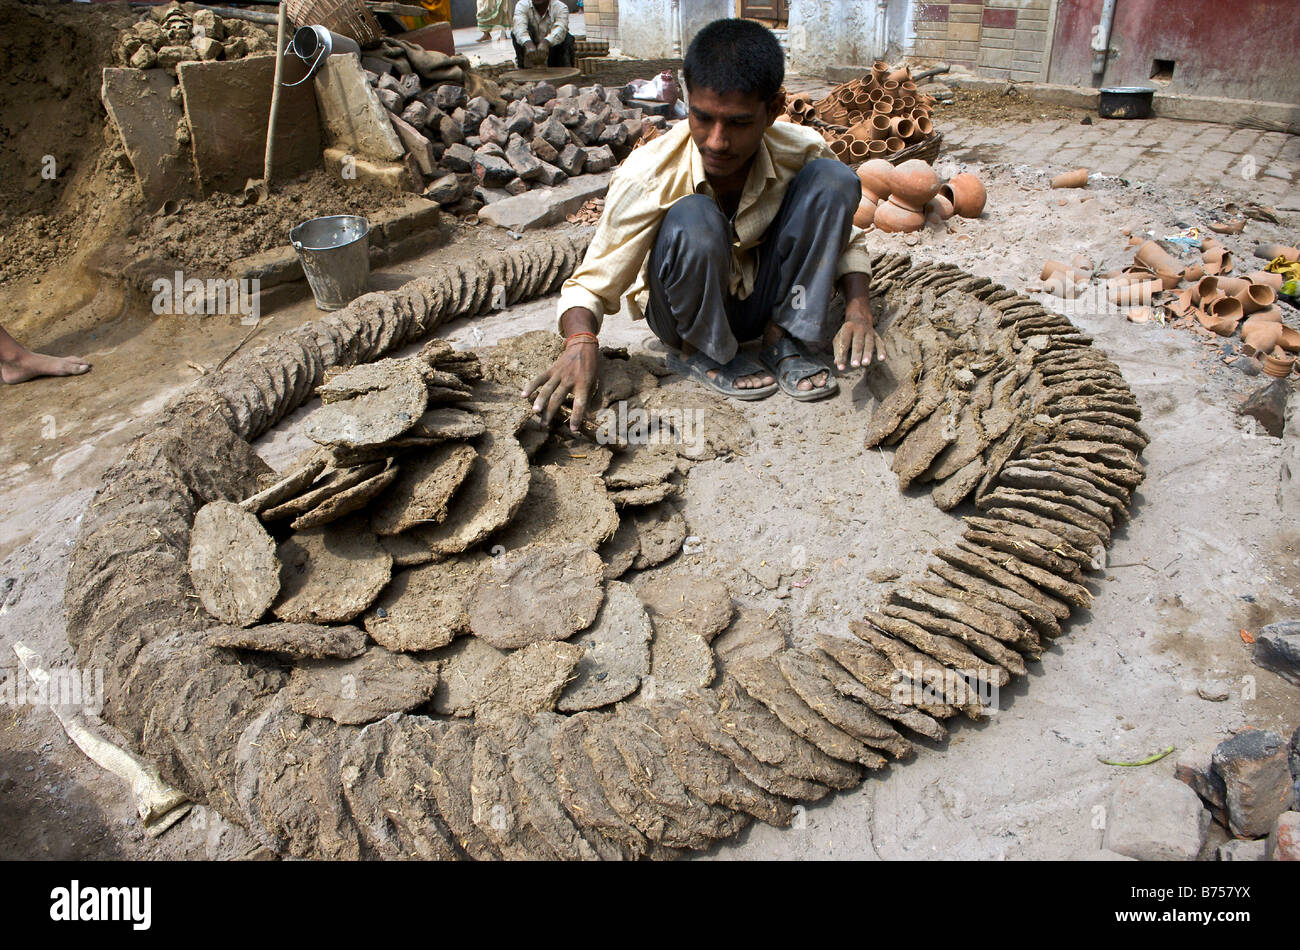 India Vrindavan Cow Dung Dried And Used As Cooking Fuel Stock